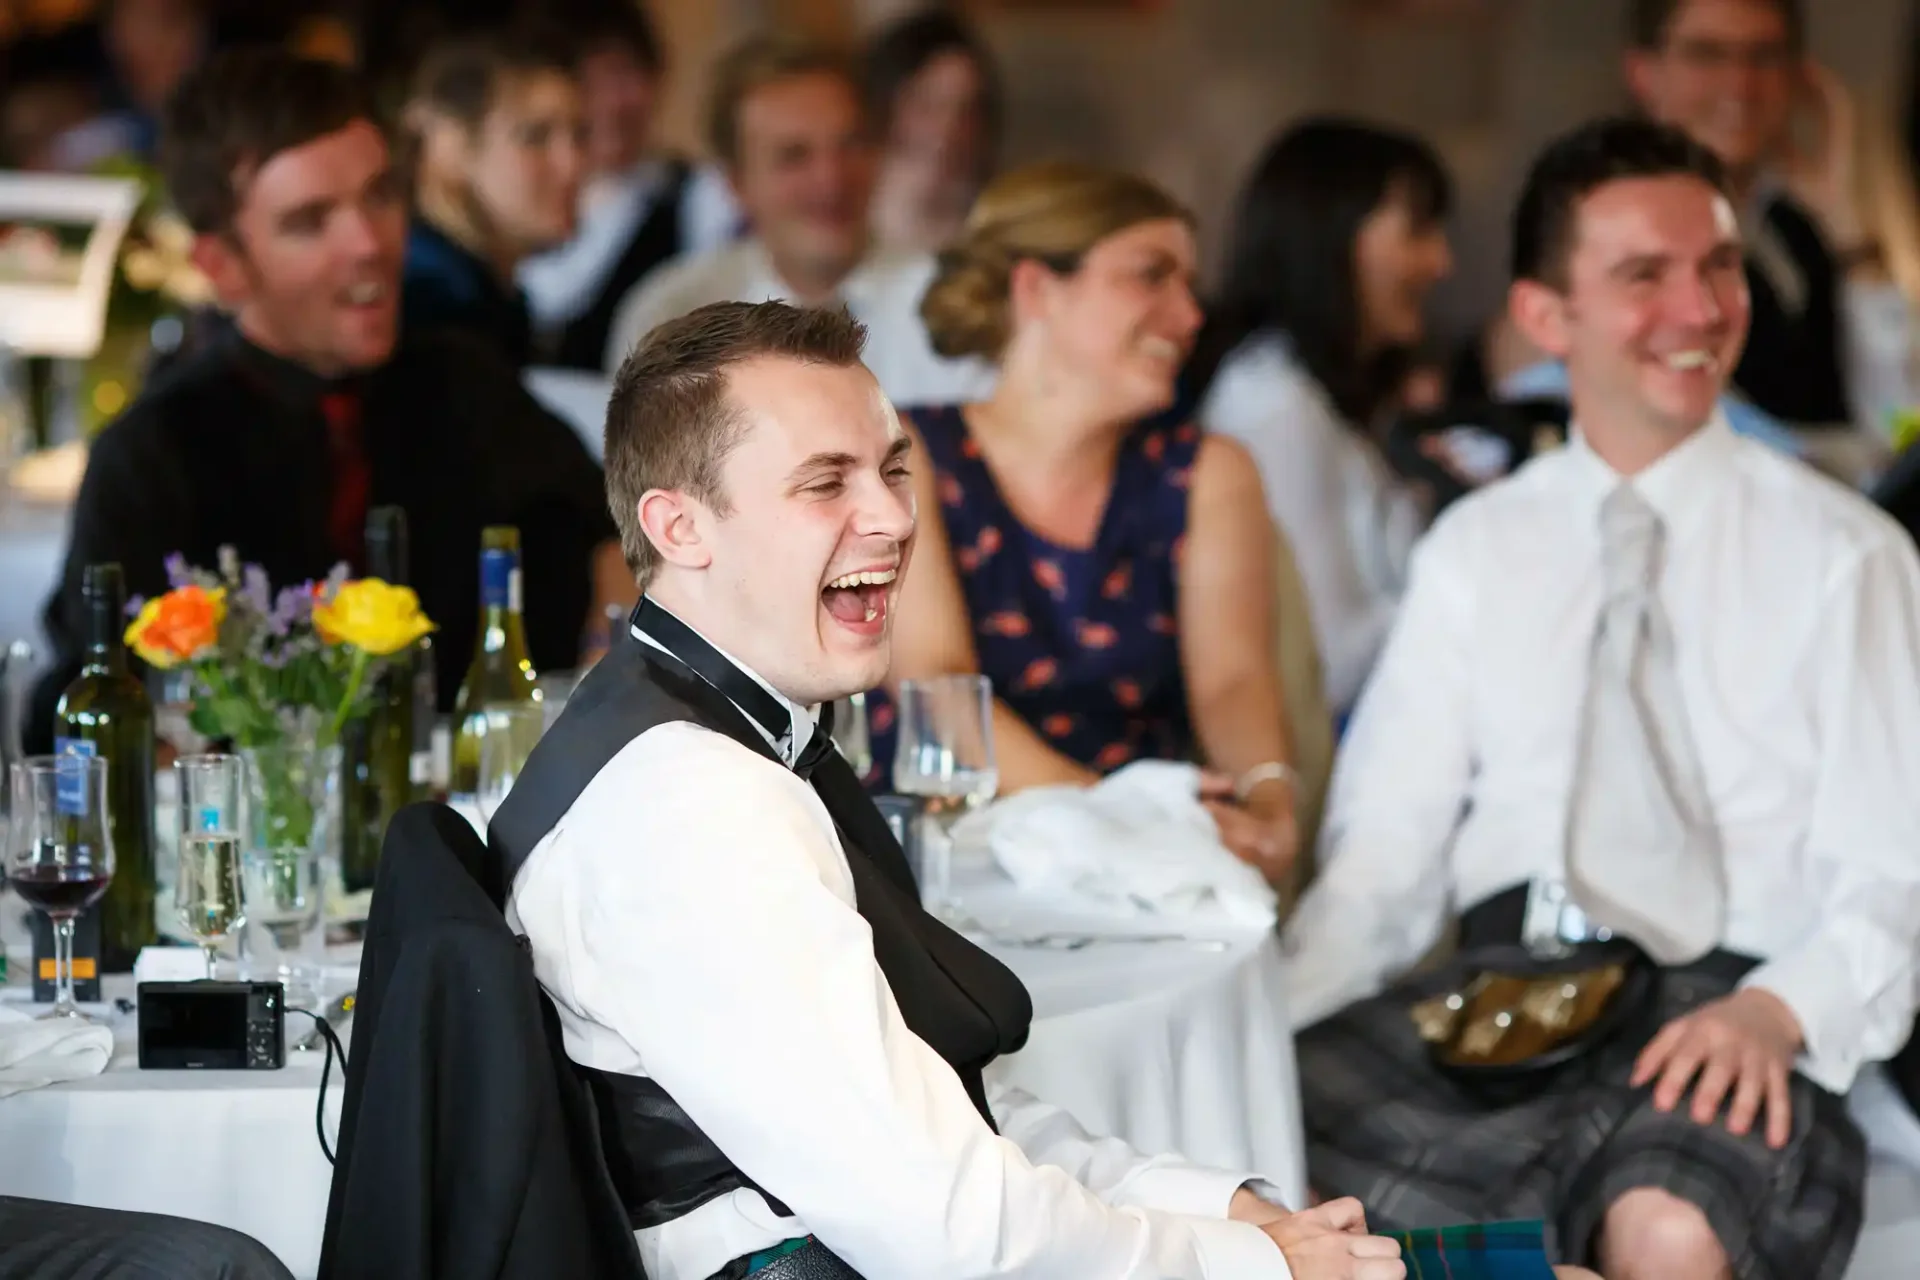 A man in a wheelchair laughs joyously, surrounded by other guests enjoying a festive event, all seated at tables adorned with colorful flowers.